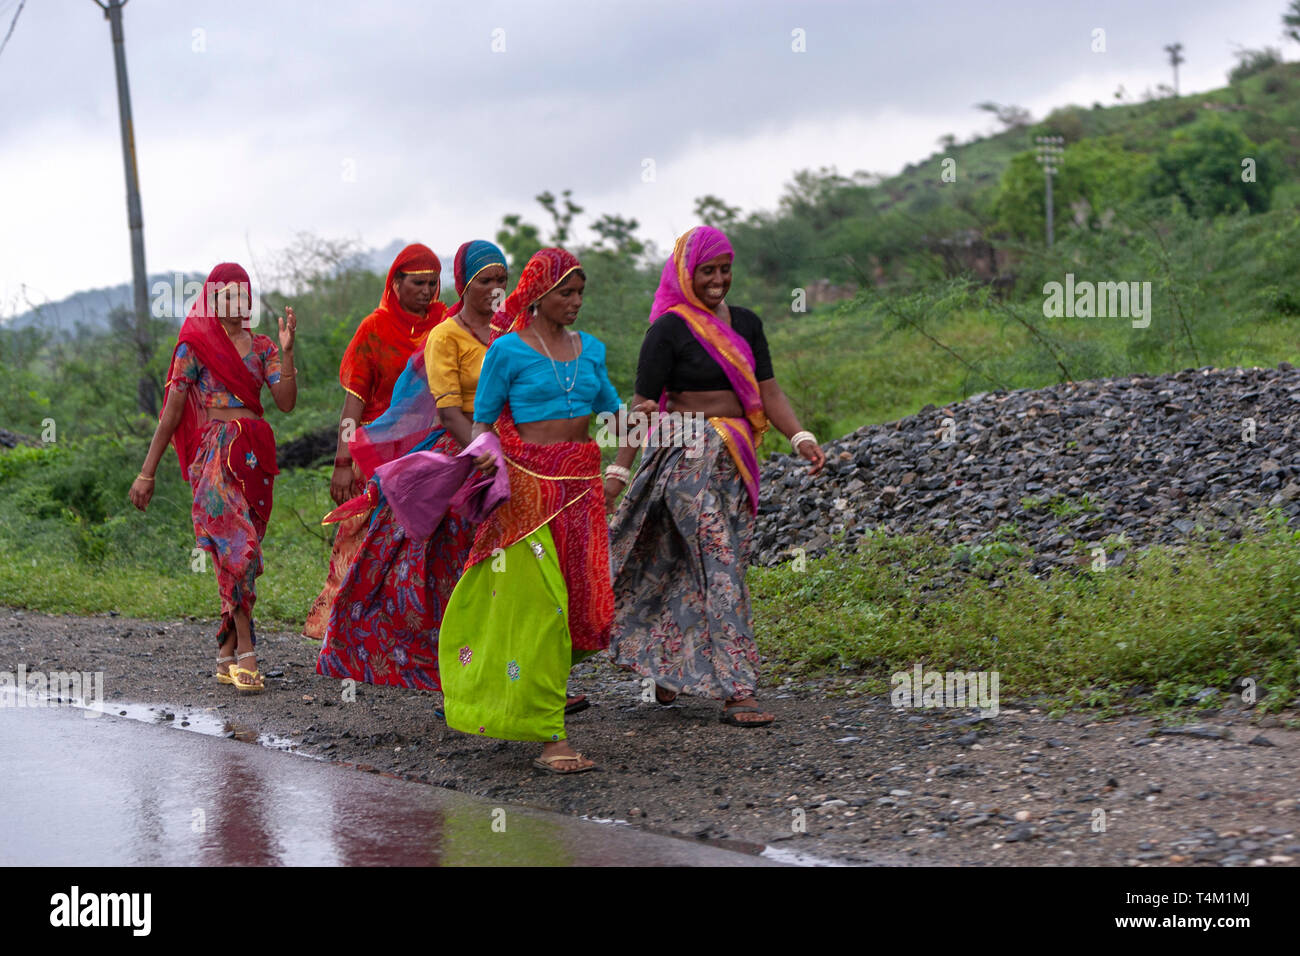 Group of rajasthani women with colourful dress walking along a road in Rajasthan, India Stock Photo